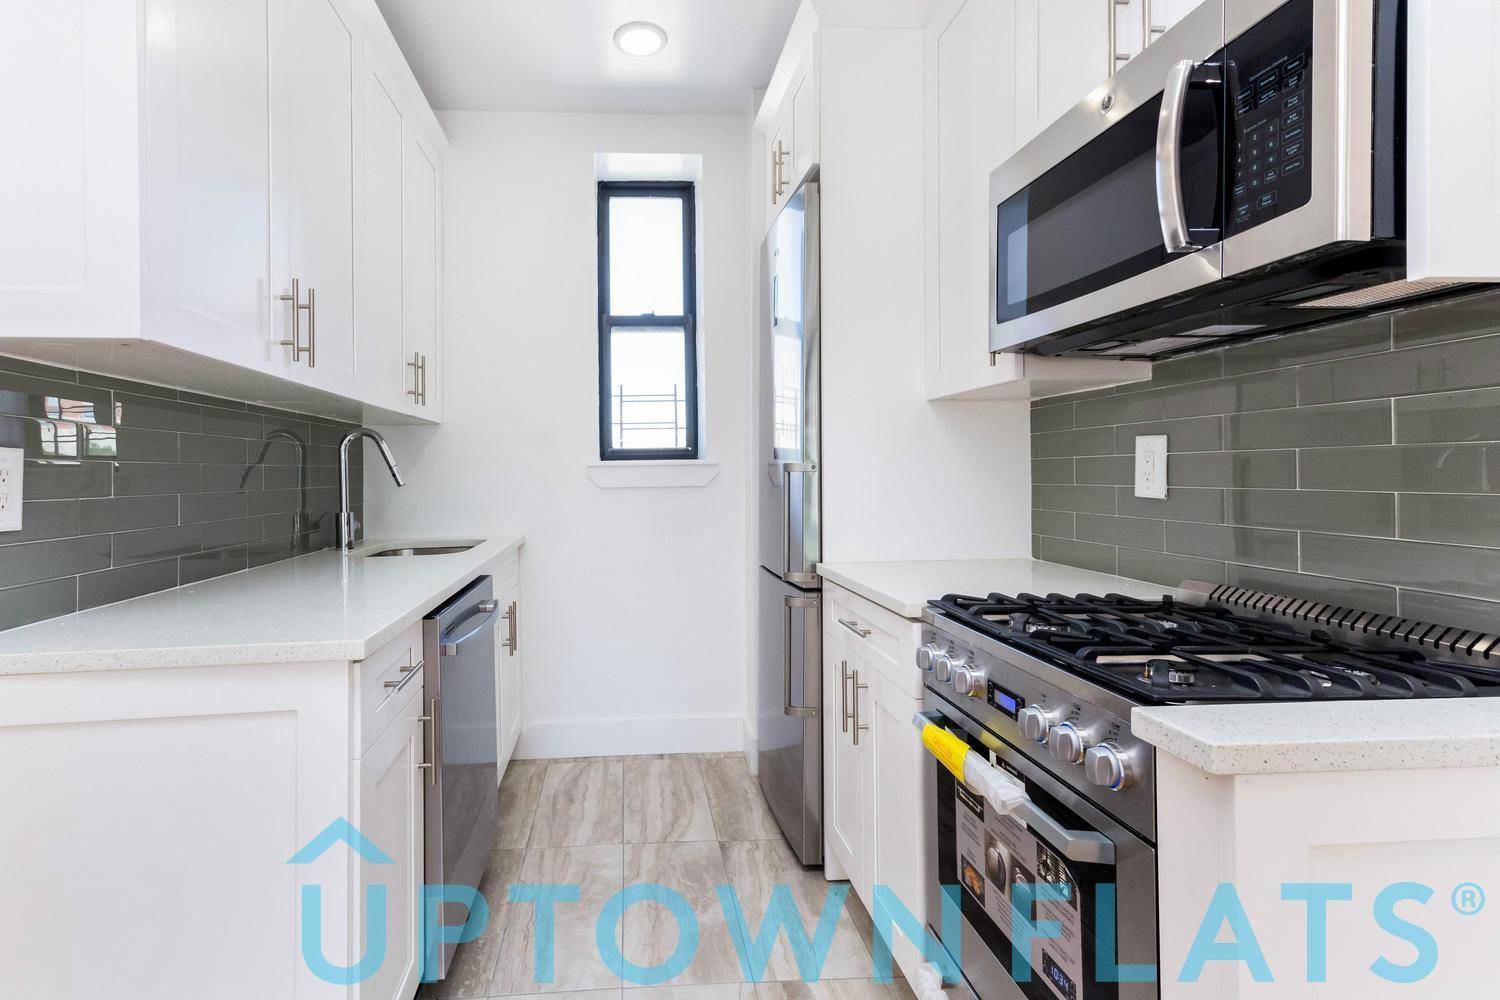 VIRTUAL TOUR AVAILABLE UPON REQUEST Be one of the FIRST to live in this Crystal clean Brand NEW 3 Bedroom home in Prime Morningside location Right near Columbia University !